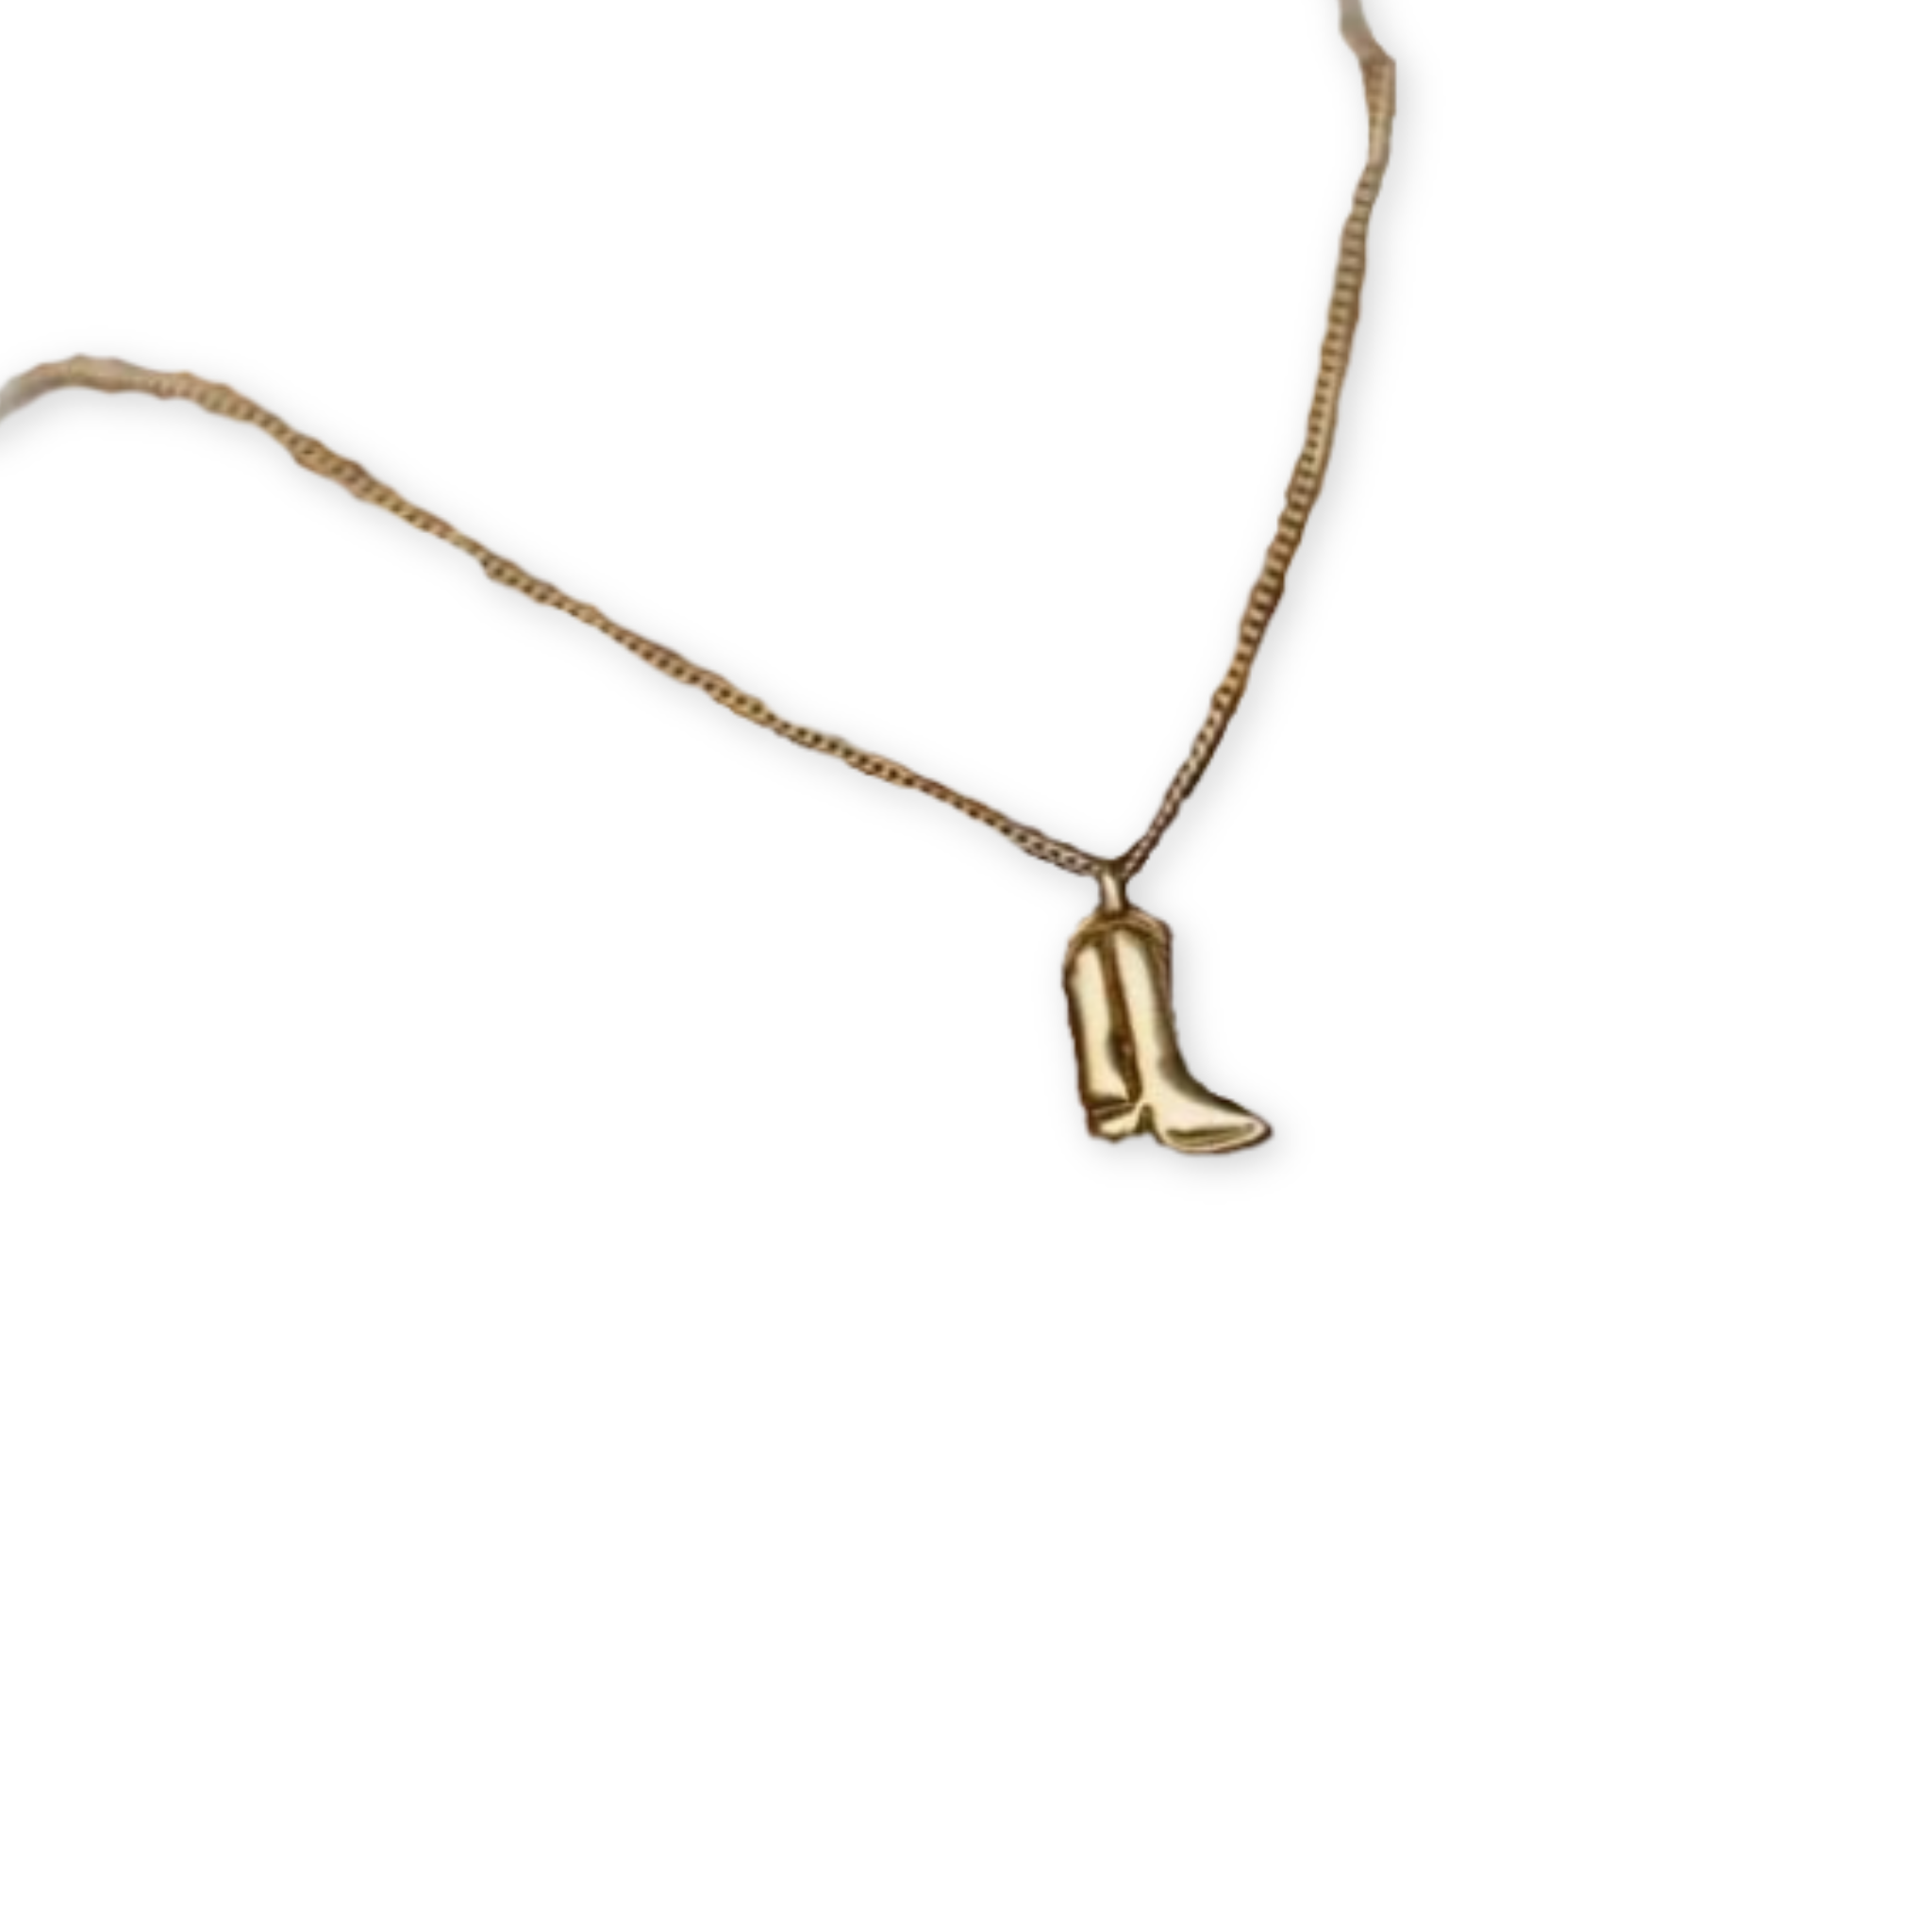 gold necklace with a cowboy boot pendant 